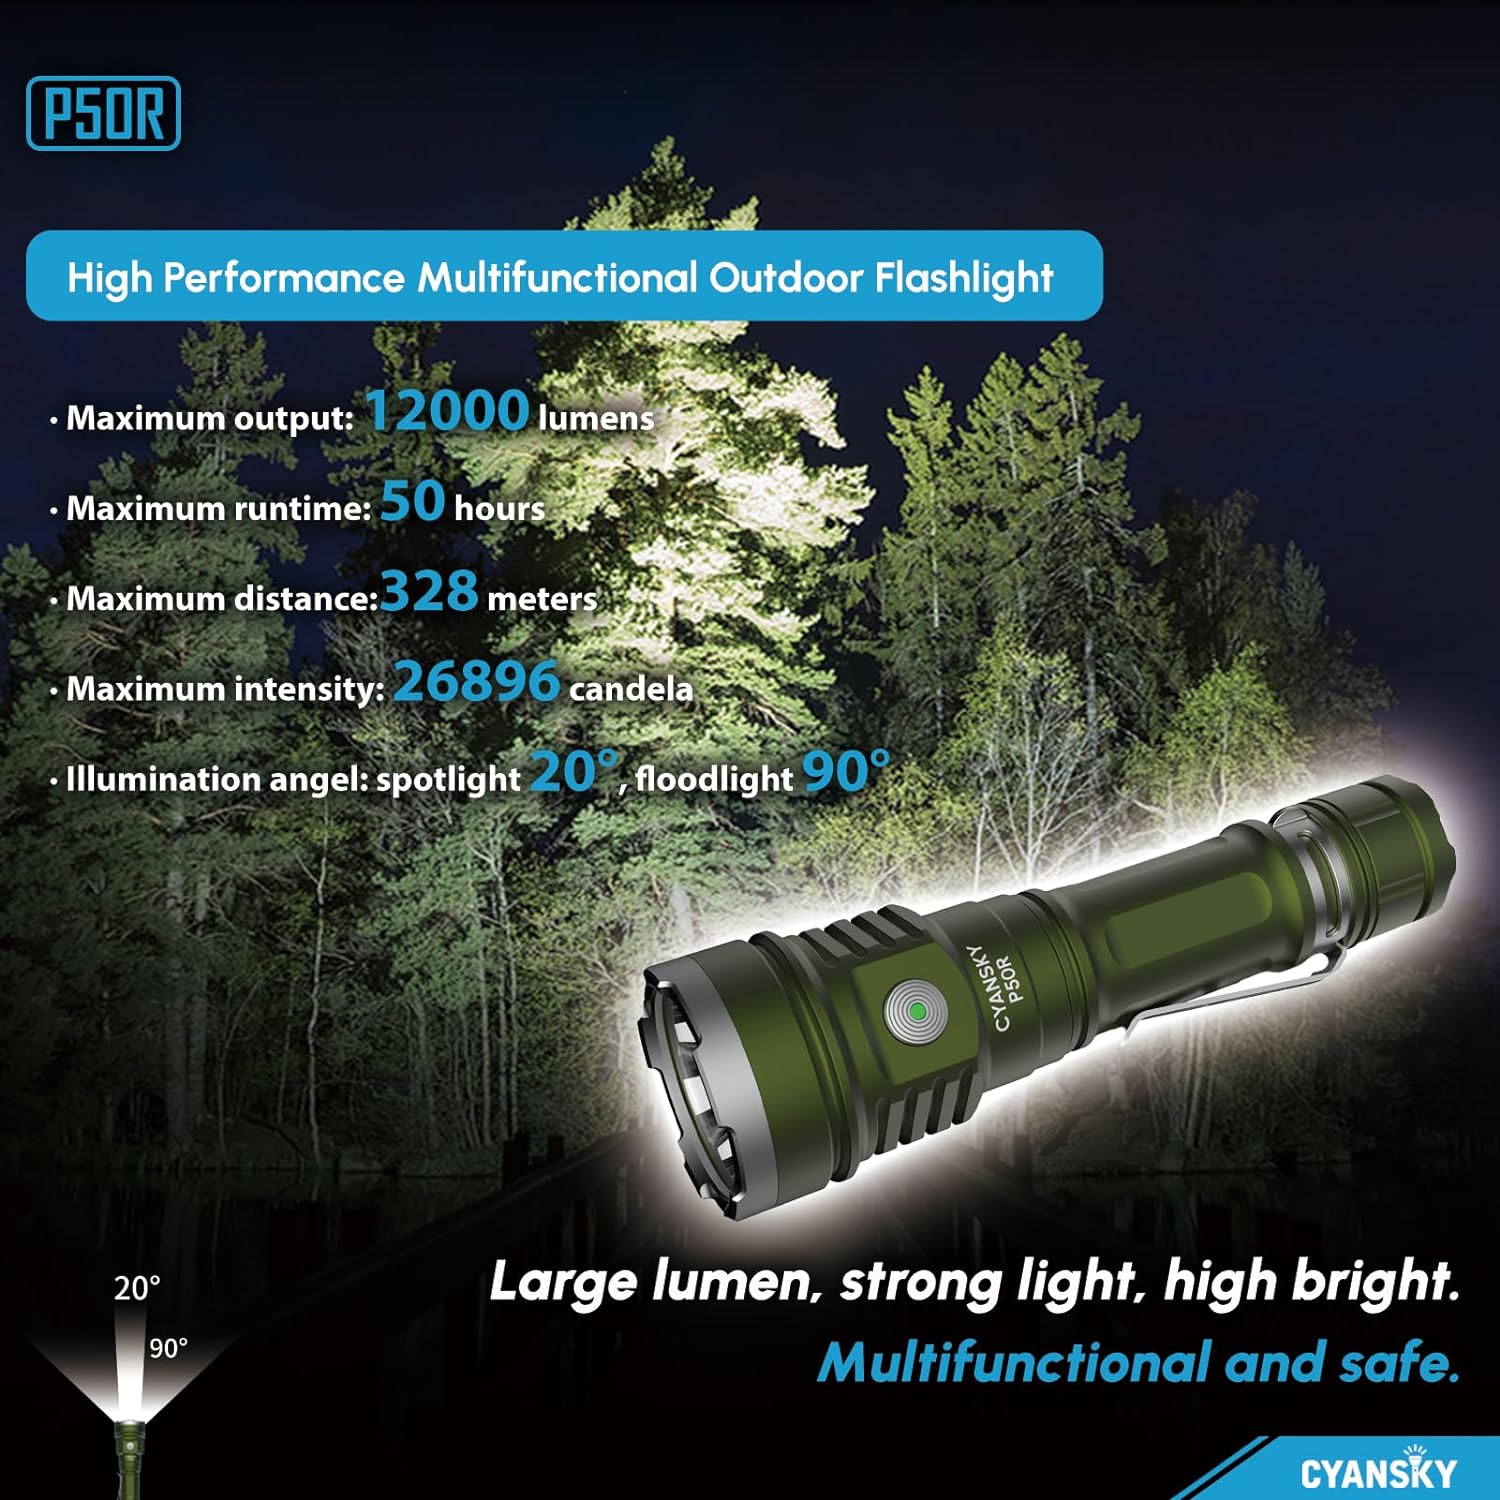 CYASNKY P50R Rechargeable Flashlights,12000 Lumens,Flashlights High Lumens for Outdoor,Super Bright Flashlight,EDC IP68 Waterproof Flash Light for Searching,Rescue,Camping and Emergency